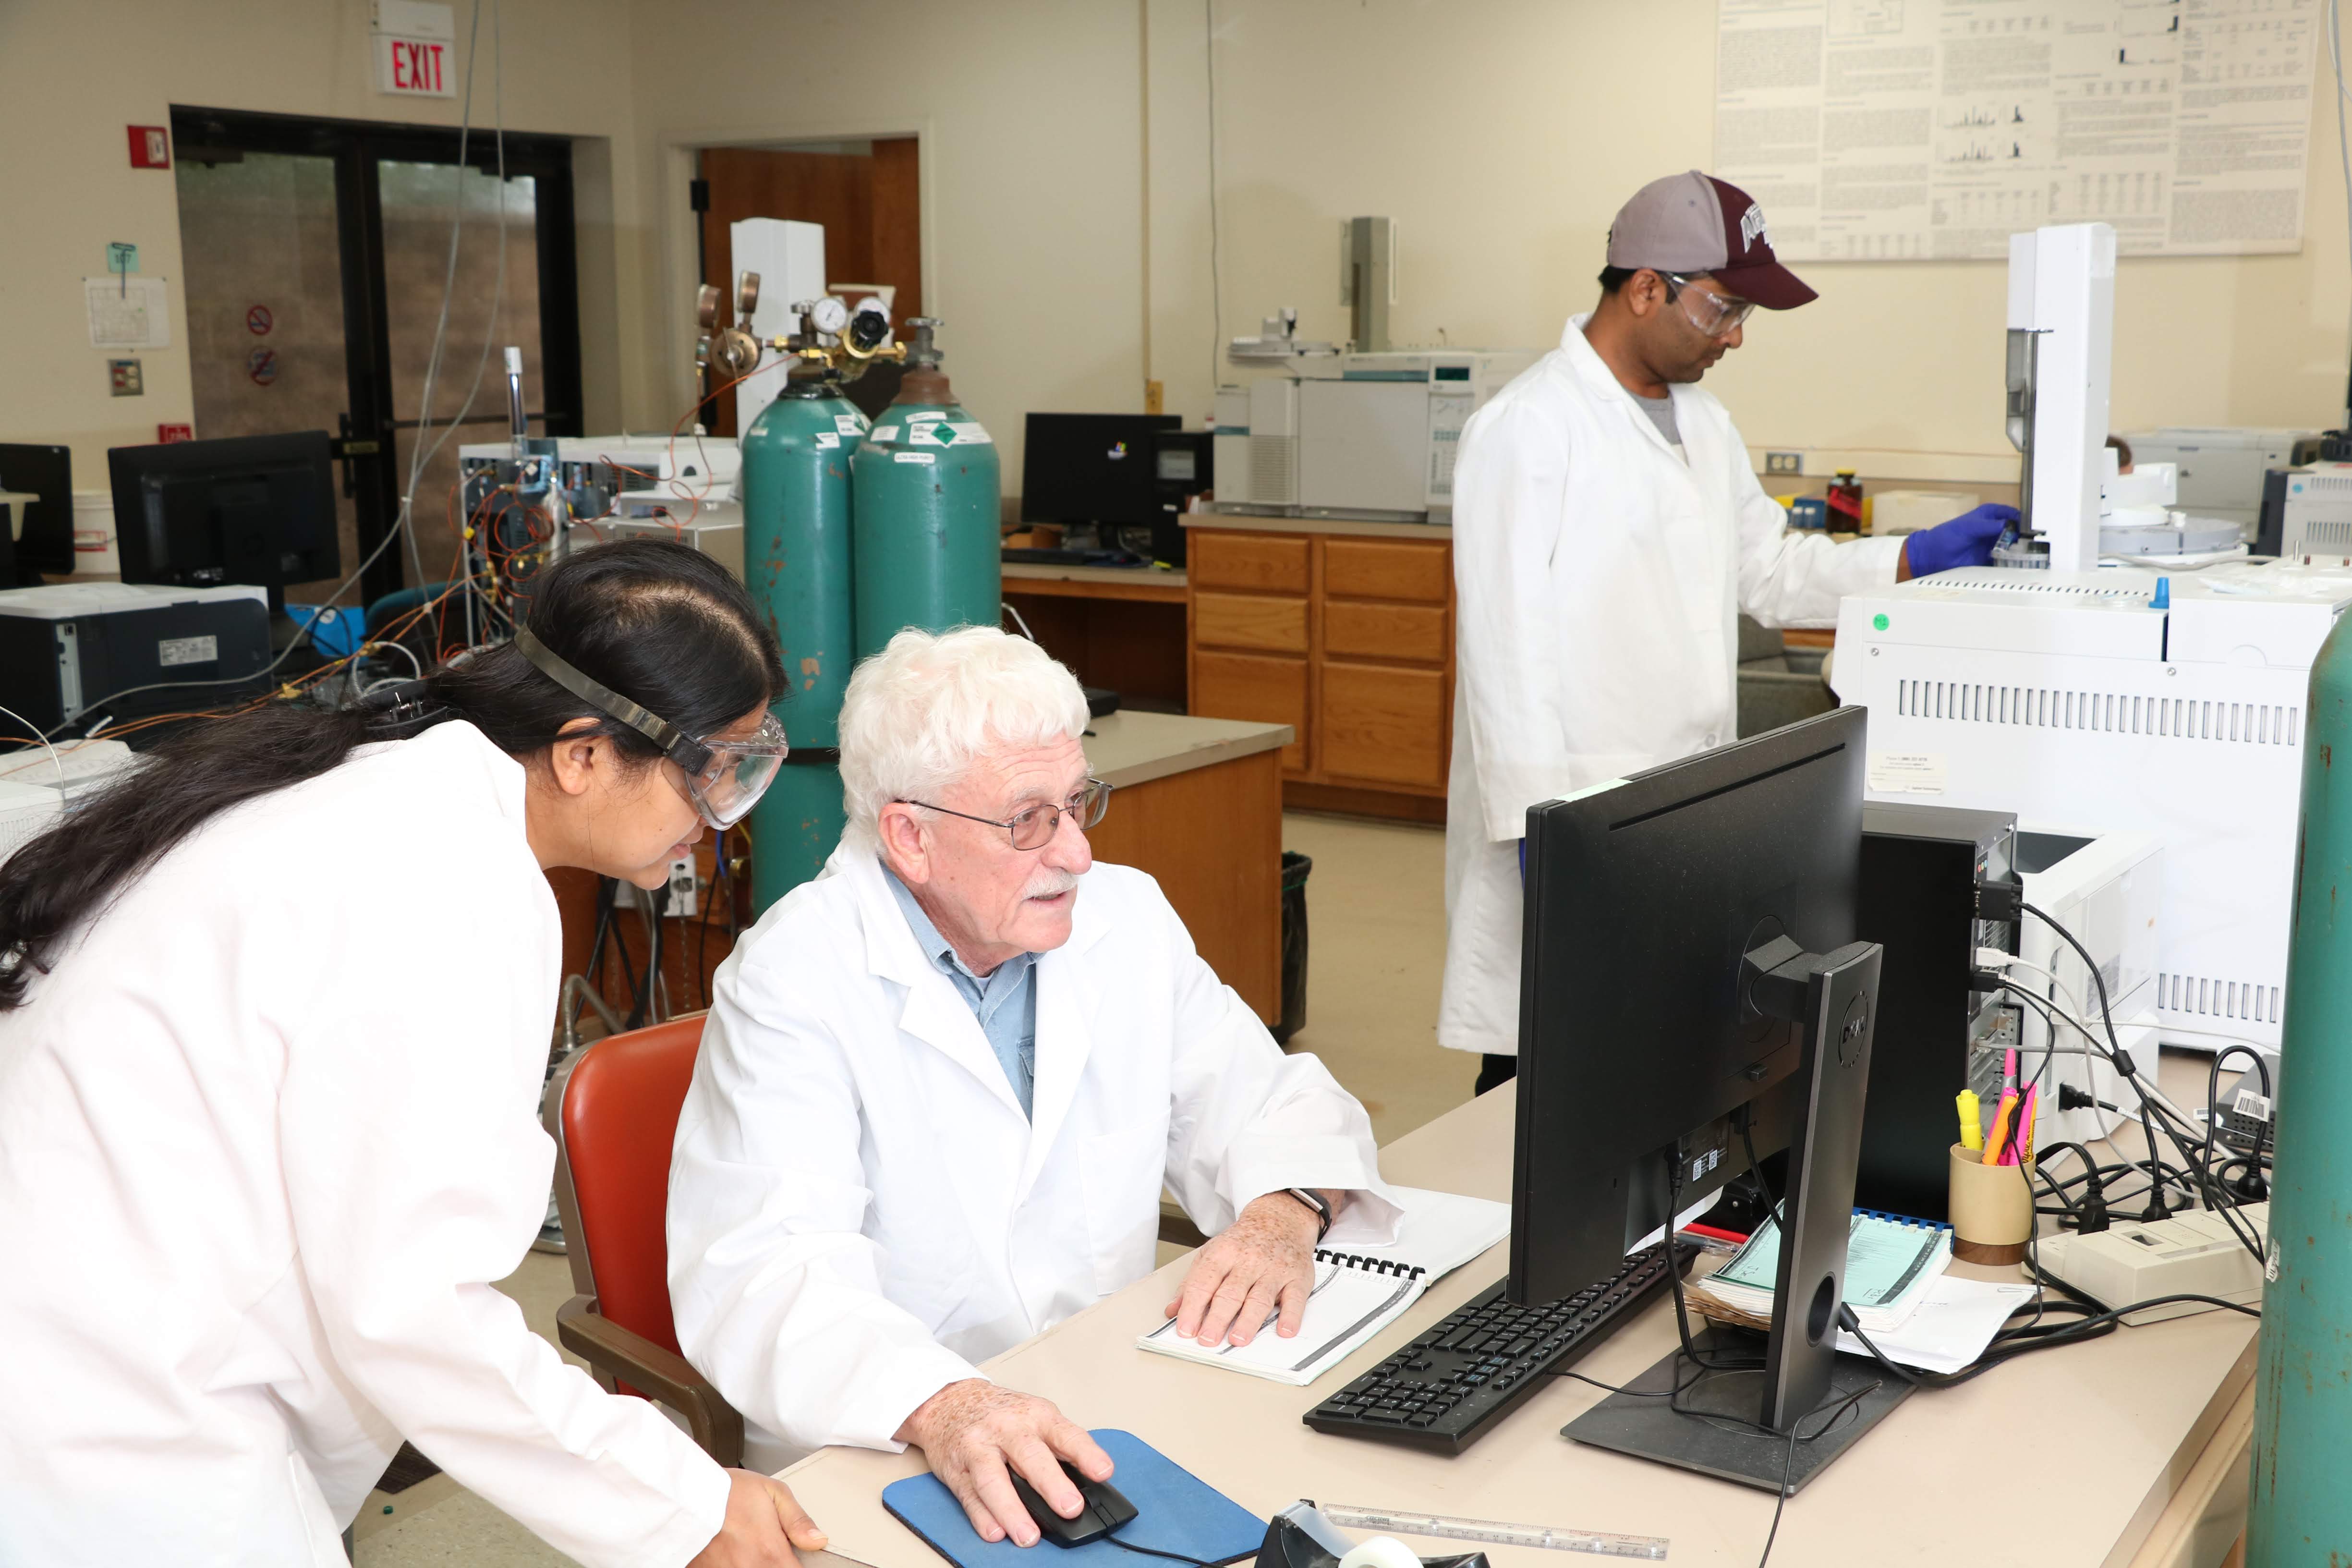 Terry Wade helping a student in the lab